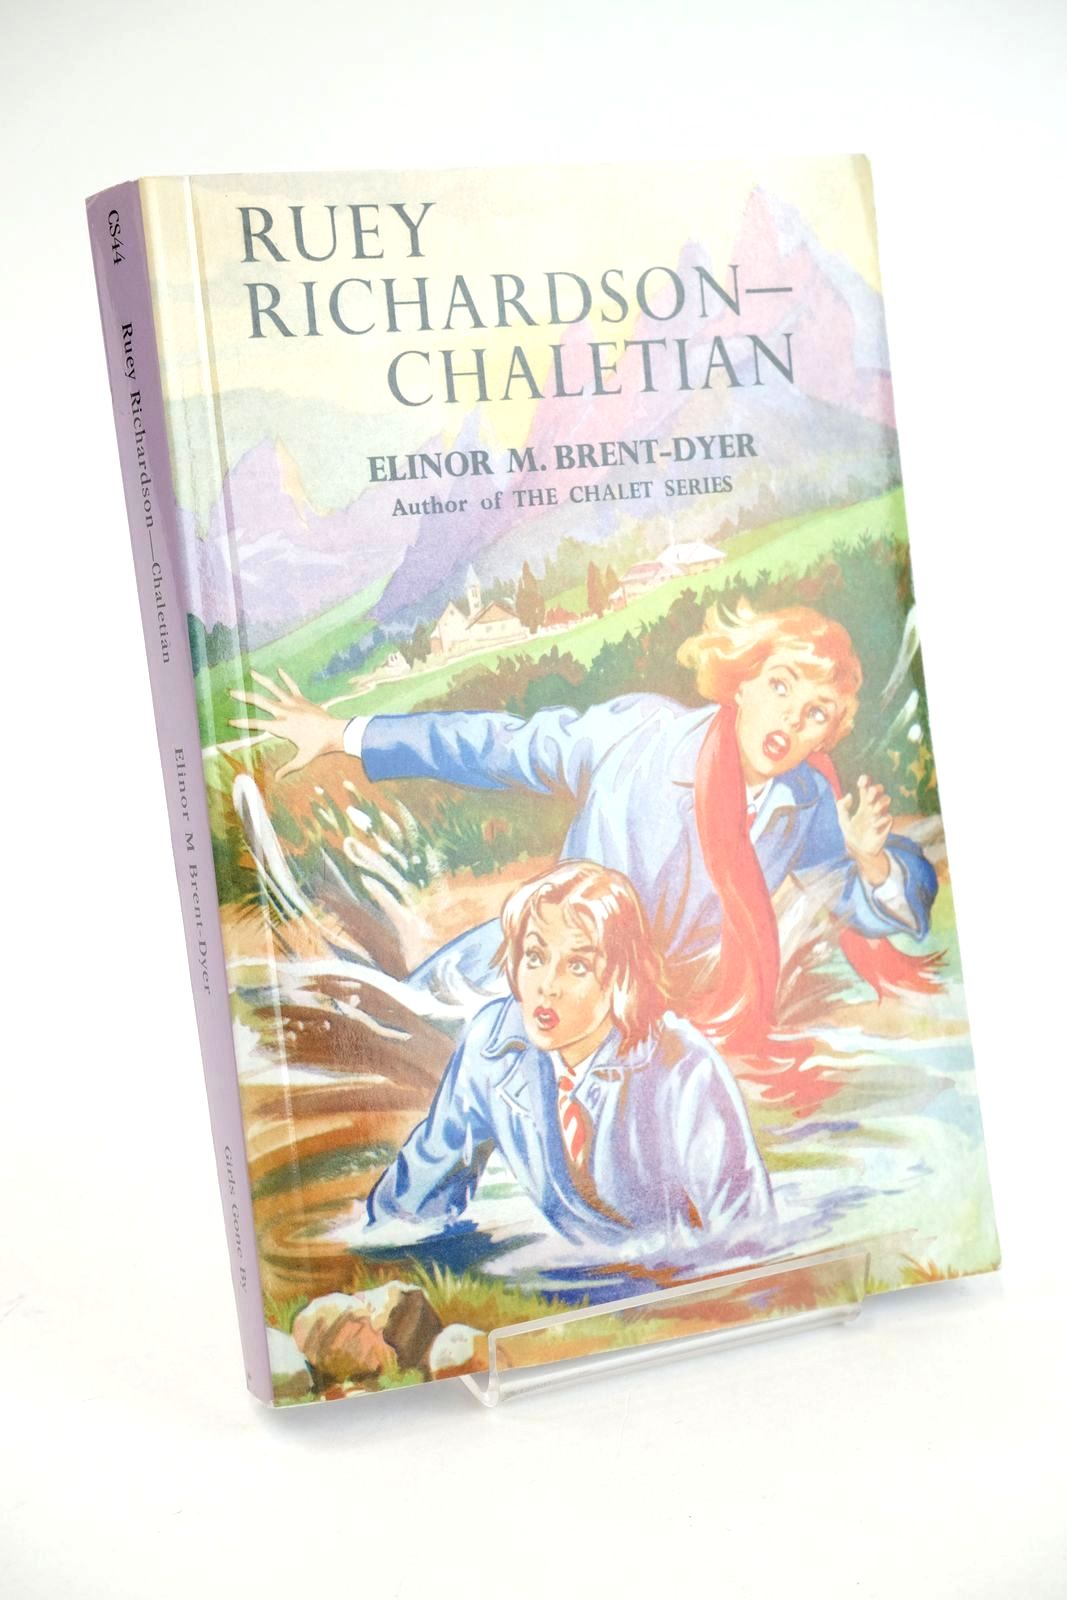 Photo of RUEY RICHARDSON - CHALETIAN written by Brent-Dyer, Elinor M. published by Girls Gone By (STOCK CODE: 1323987)  for sale by Stella & Rose's Books